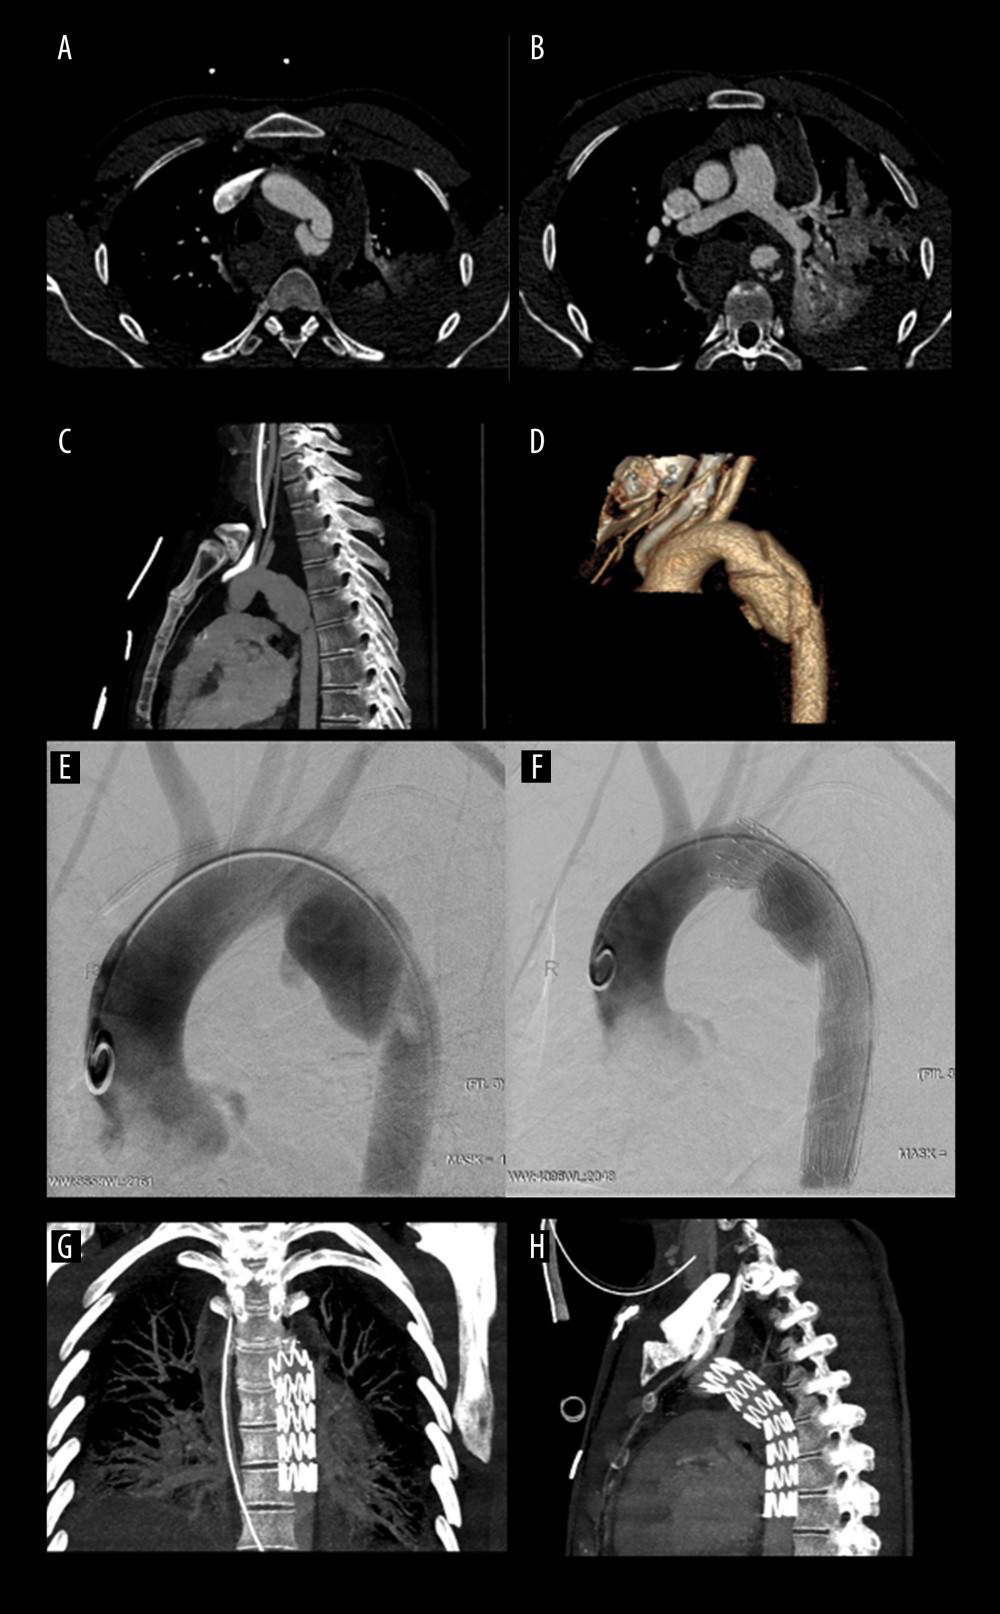 Thoracic aortic injury with active bleeding(A) Computed tomography (CT) angiogram of the axial maximum intensity projection (MIP) reconstruction with aortic trauma in loco typico. (B) CT showing left hemothorax, pulmonary trauma, and active bleeding. (C) CT MIP sagittal projection with aortic grade IV trauma. (D) CT volume rendering technique reconstruction of the aortic wall trauma grade IV. (E) Digital subtraction angiography with active contrast agent leakage. (F) ZDEG (Cook) stent graft implantation before the origin of the left vertebral artery with left subclavian artery coverage. (G) CT follow-up in coronal projection. (H) CT follow-up in sagittal projection.